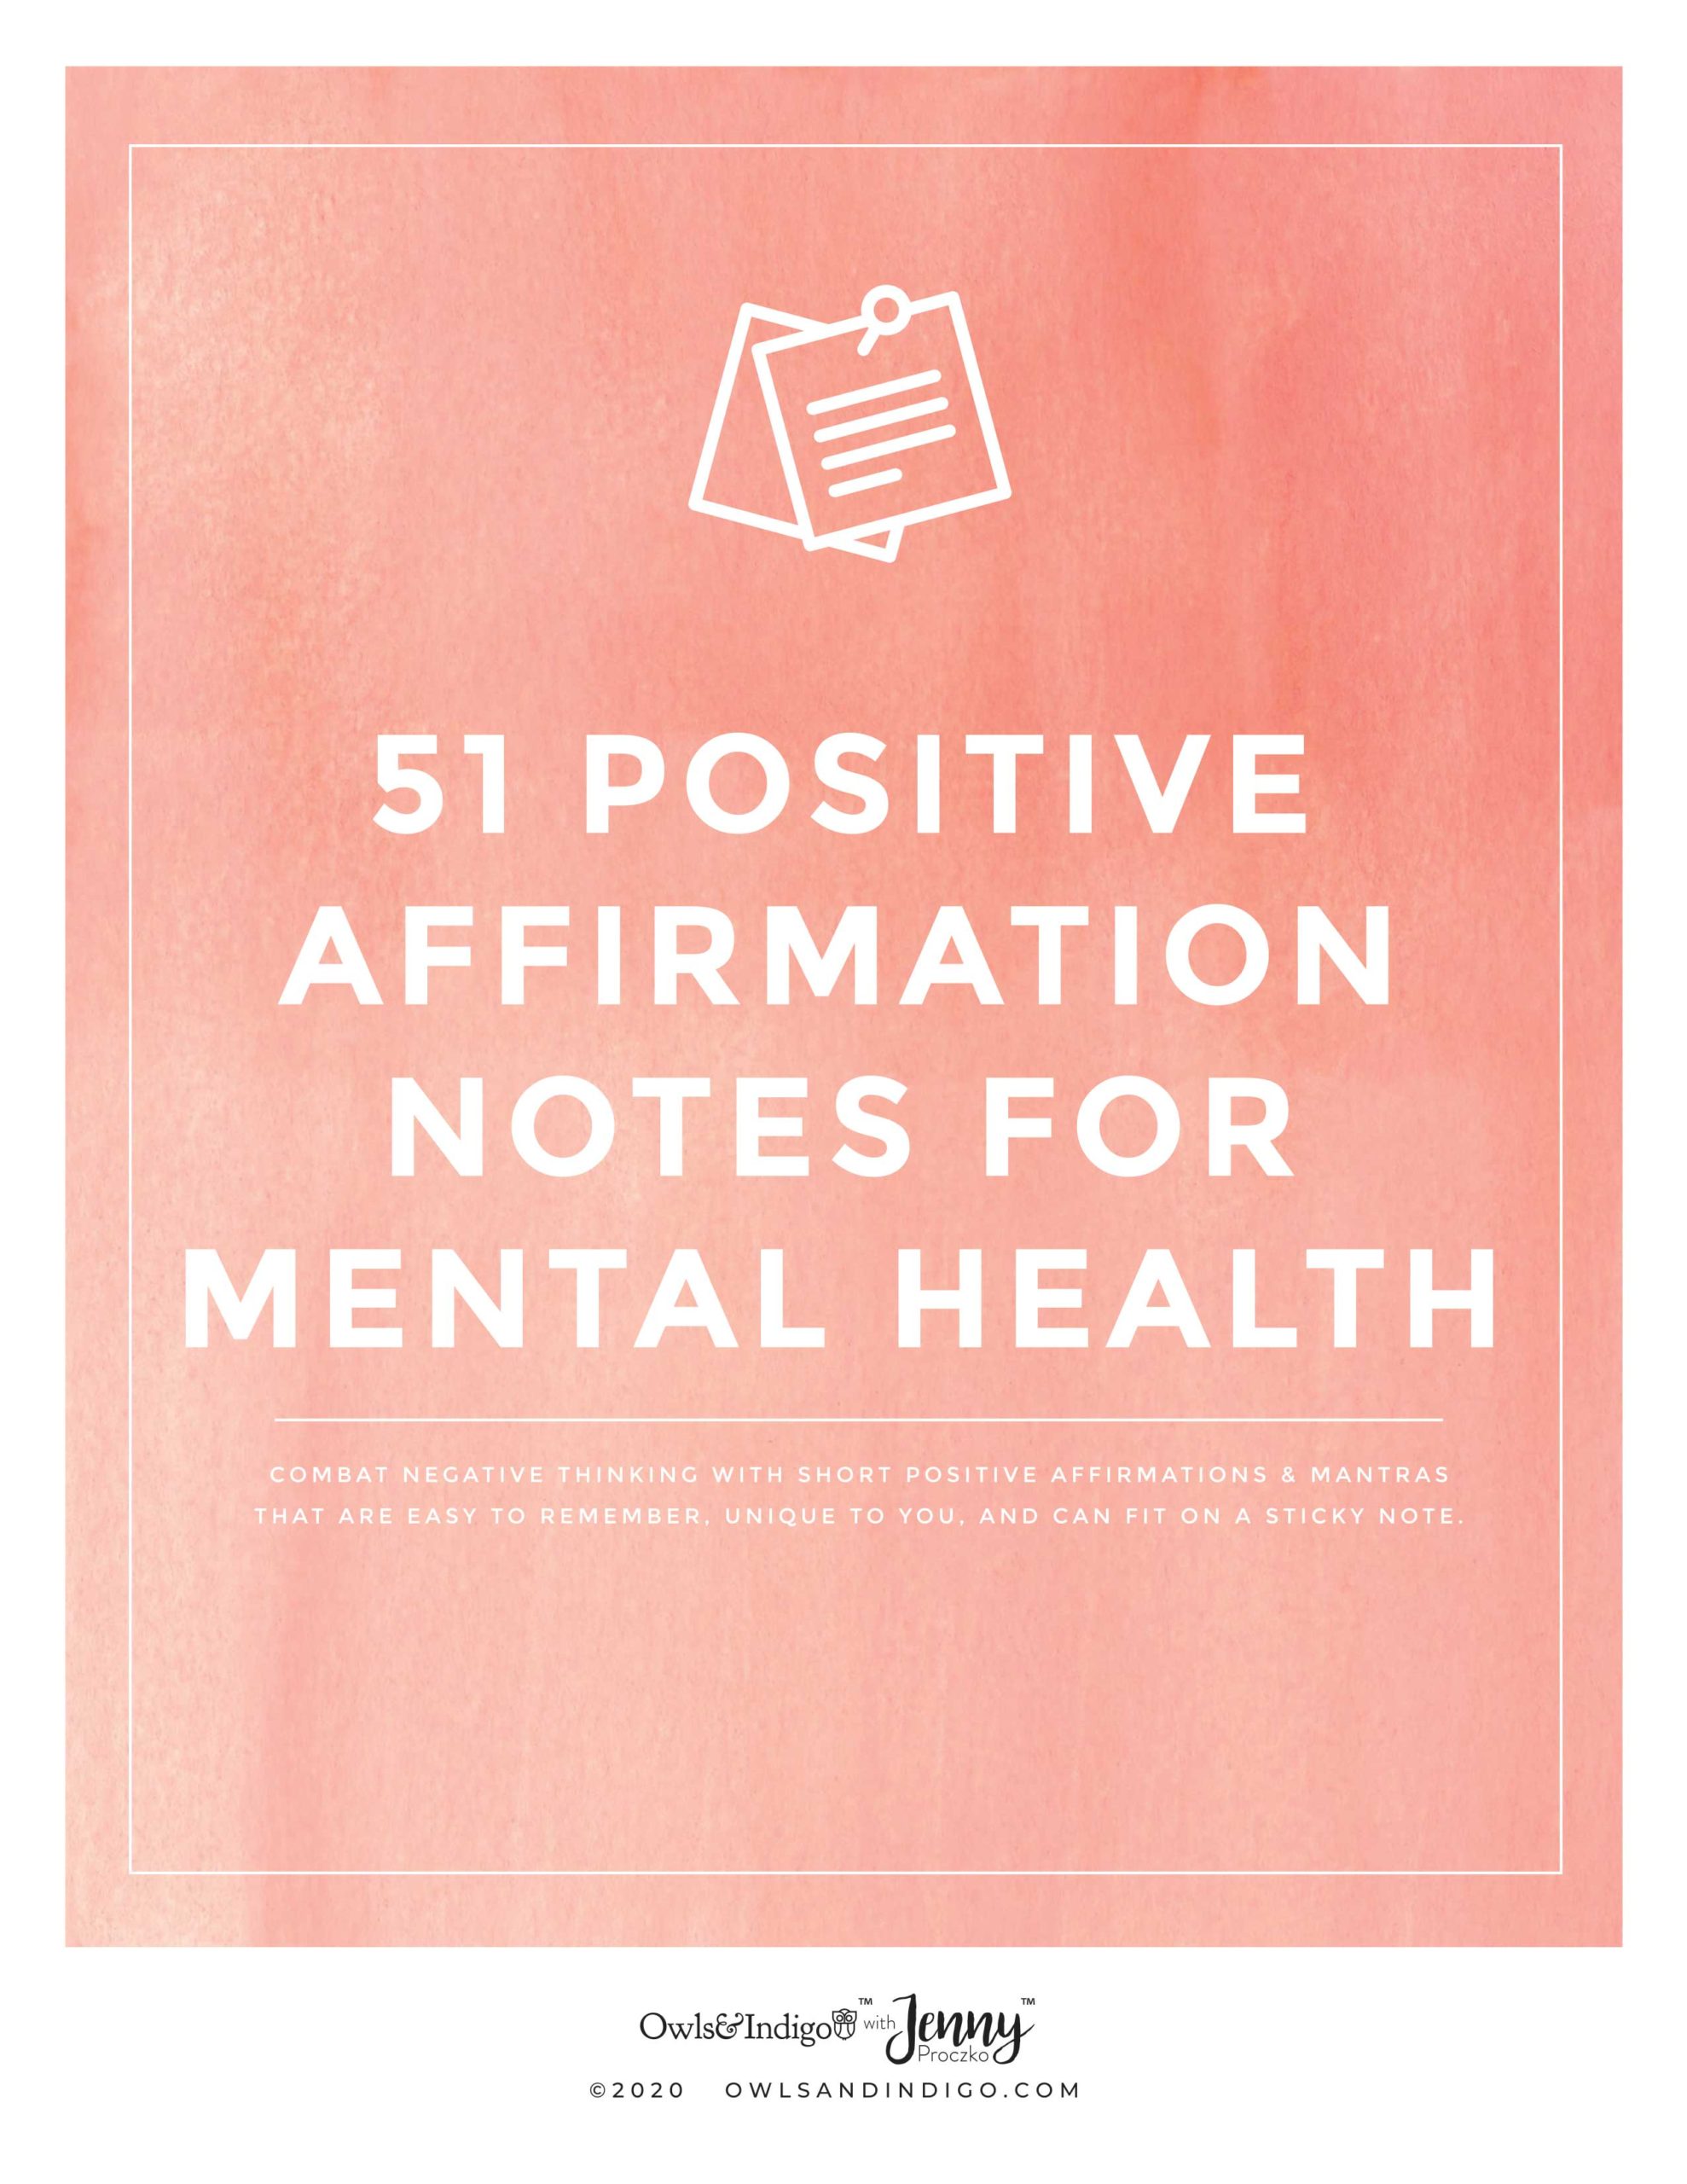 51 Positive Affirmations Mantras For Mental Health FREE Printable